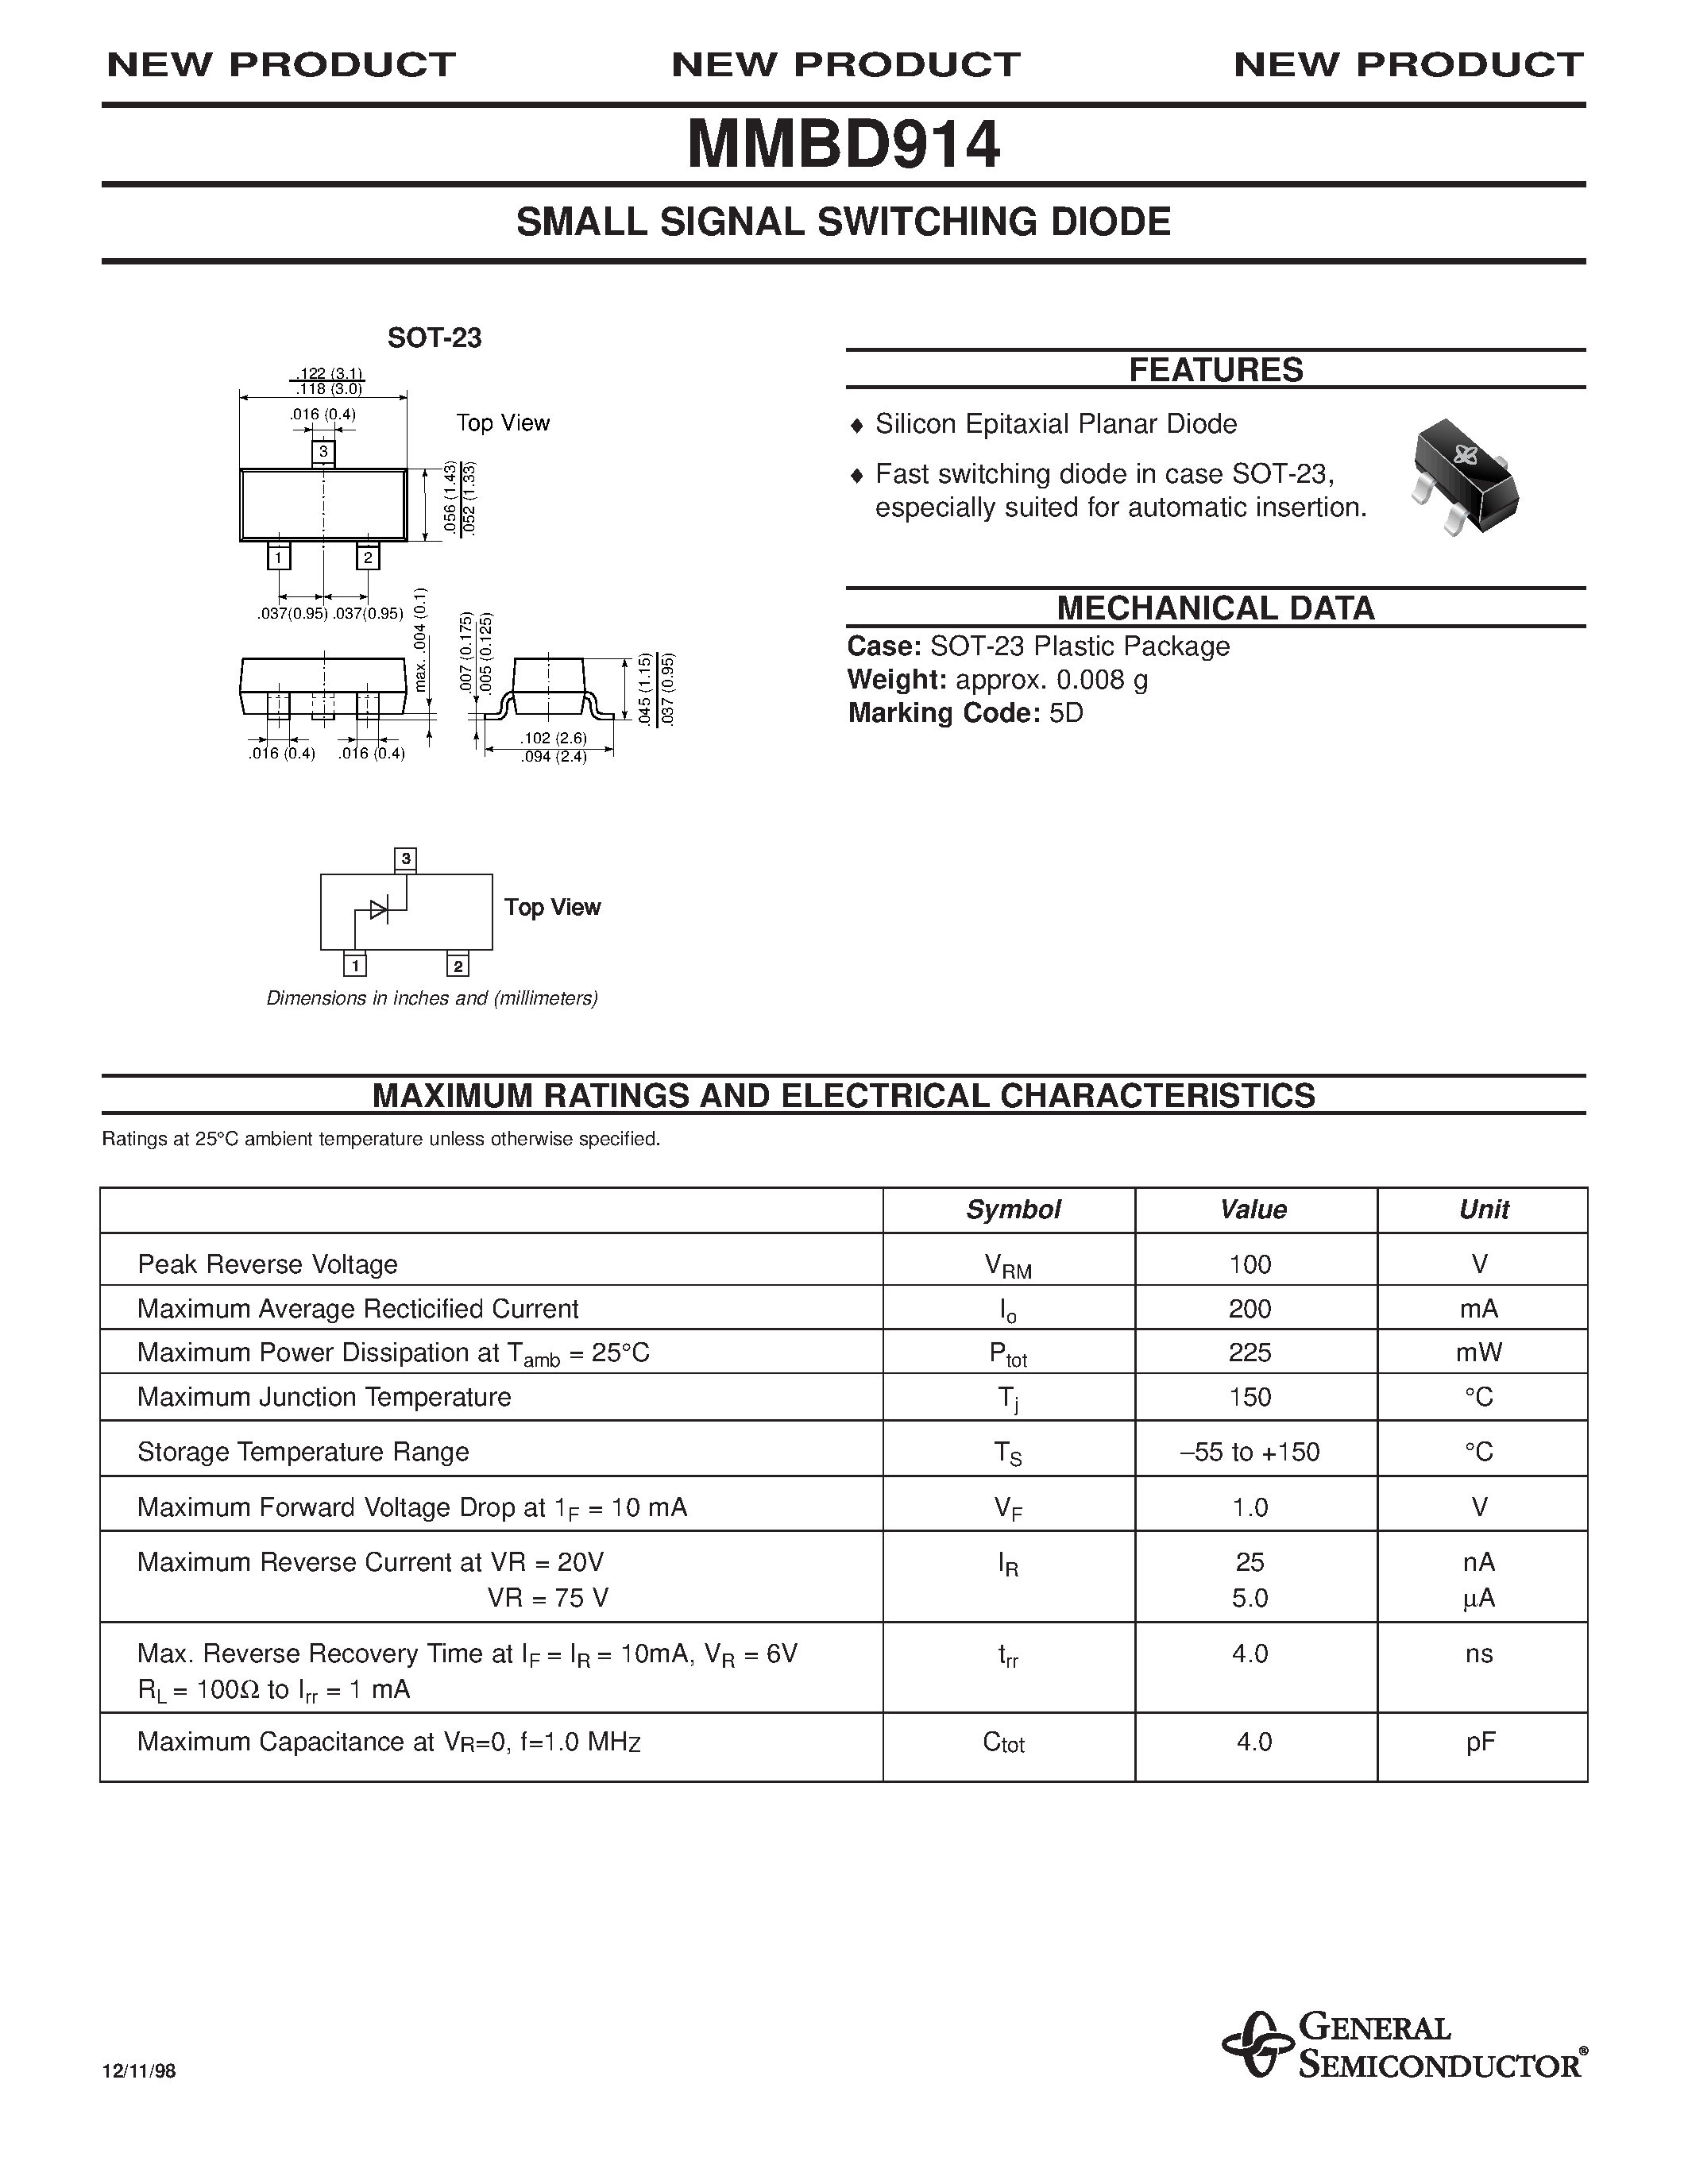 Datasheet MMBD914 - SMALL SIGNAL SWITCHING DIODE page 1